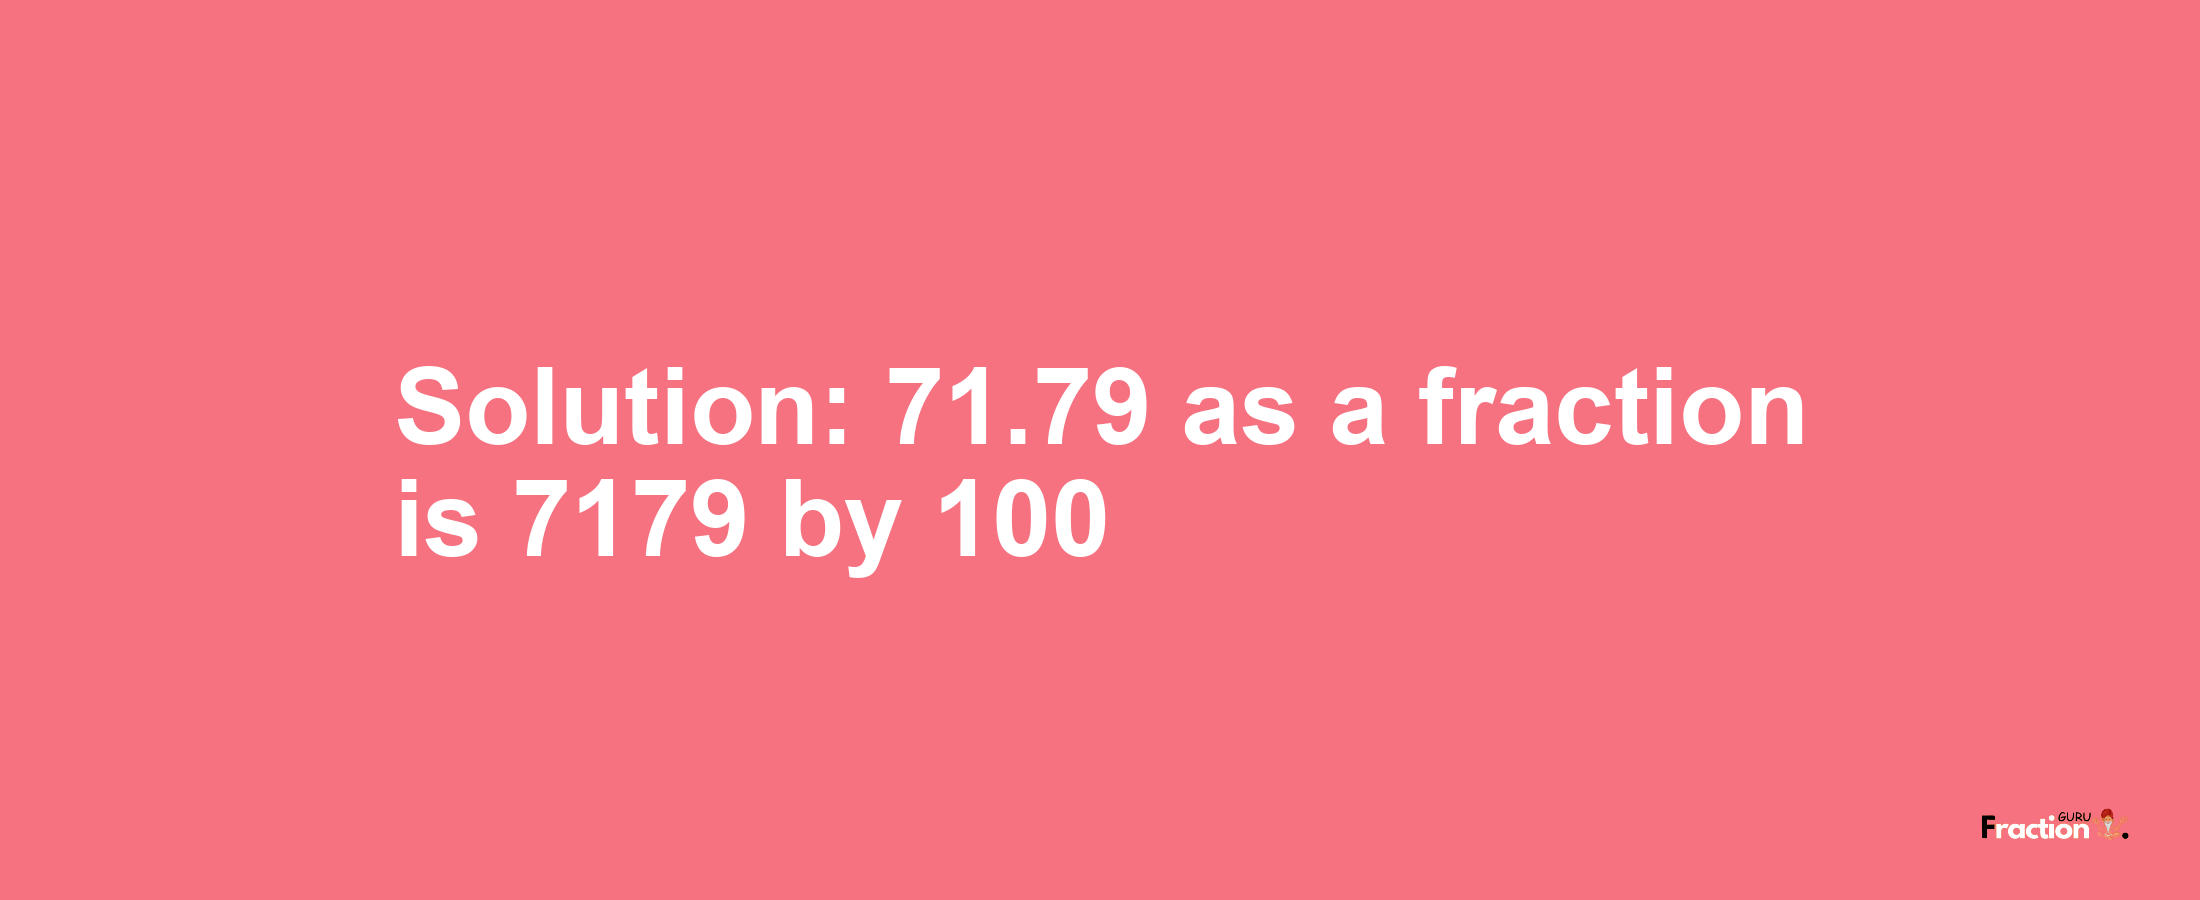 Solution:71.79 as a fraction is 7179/100